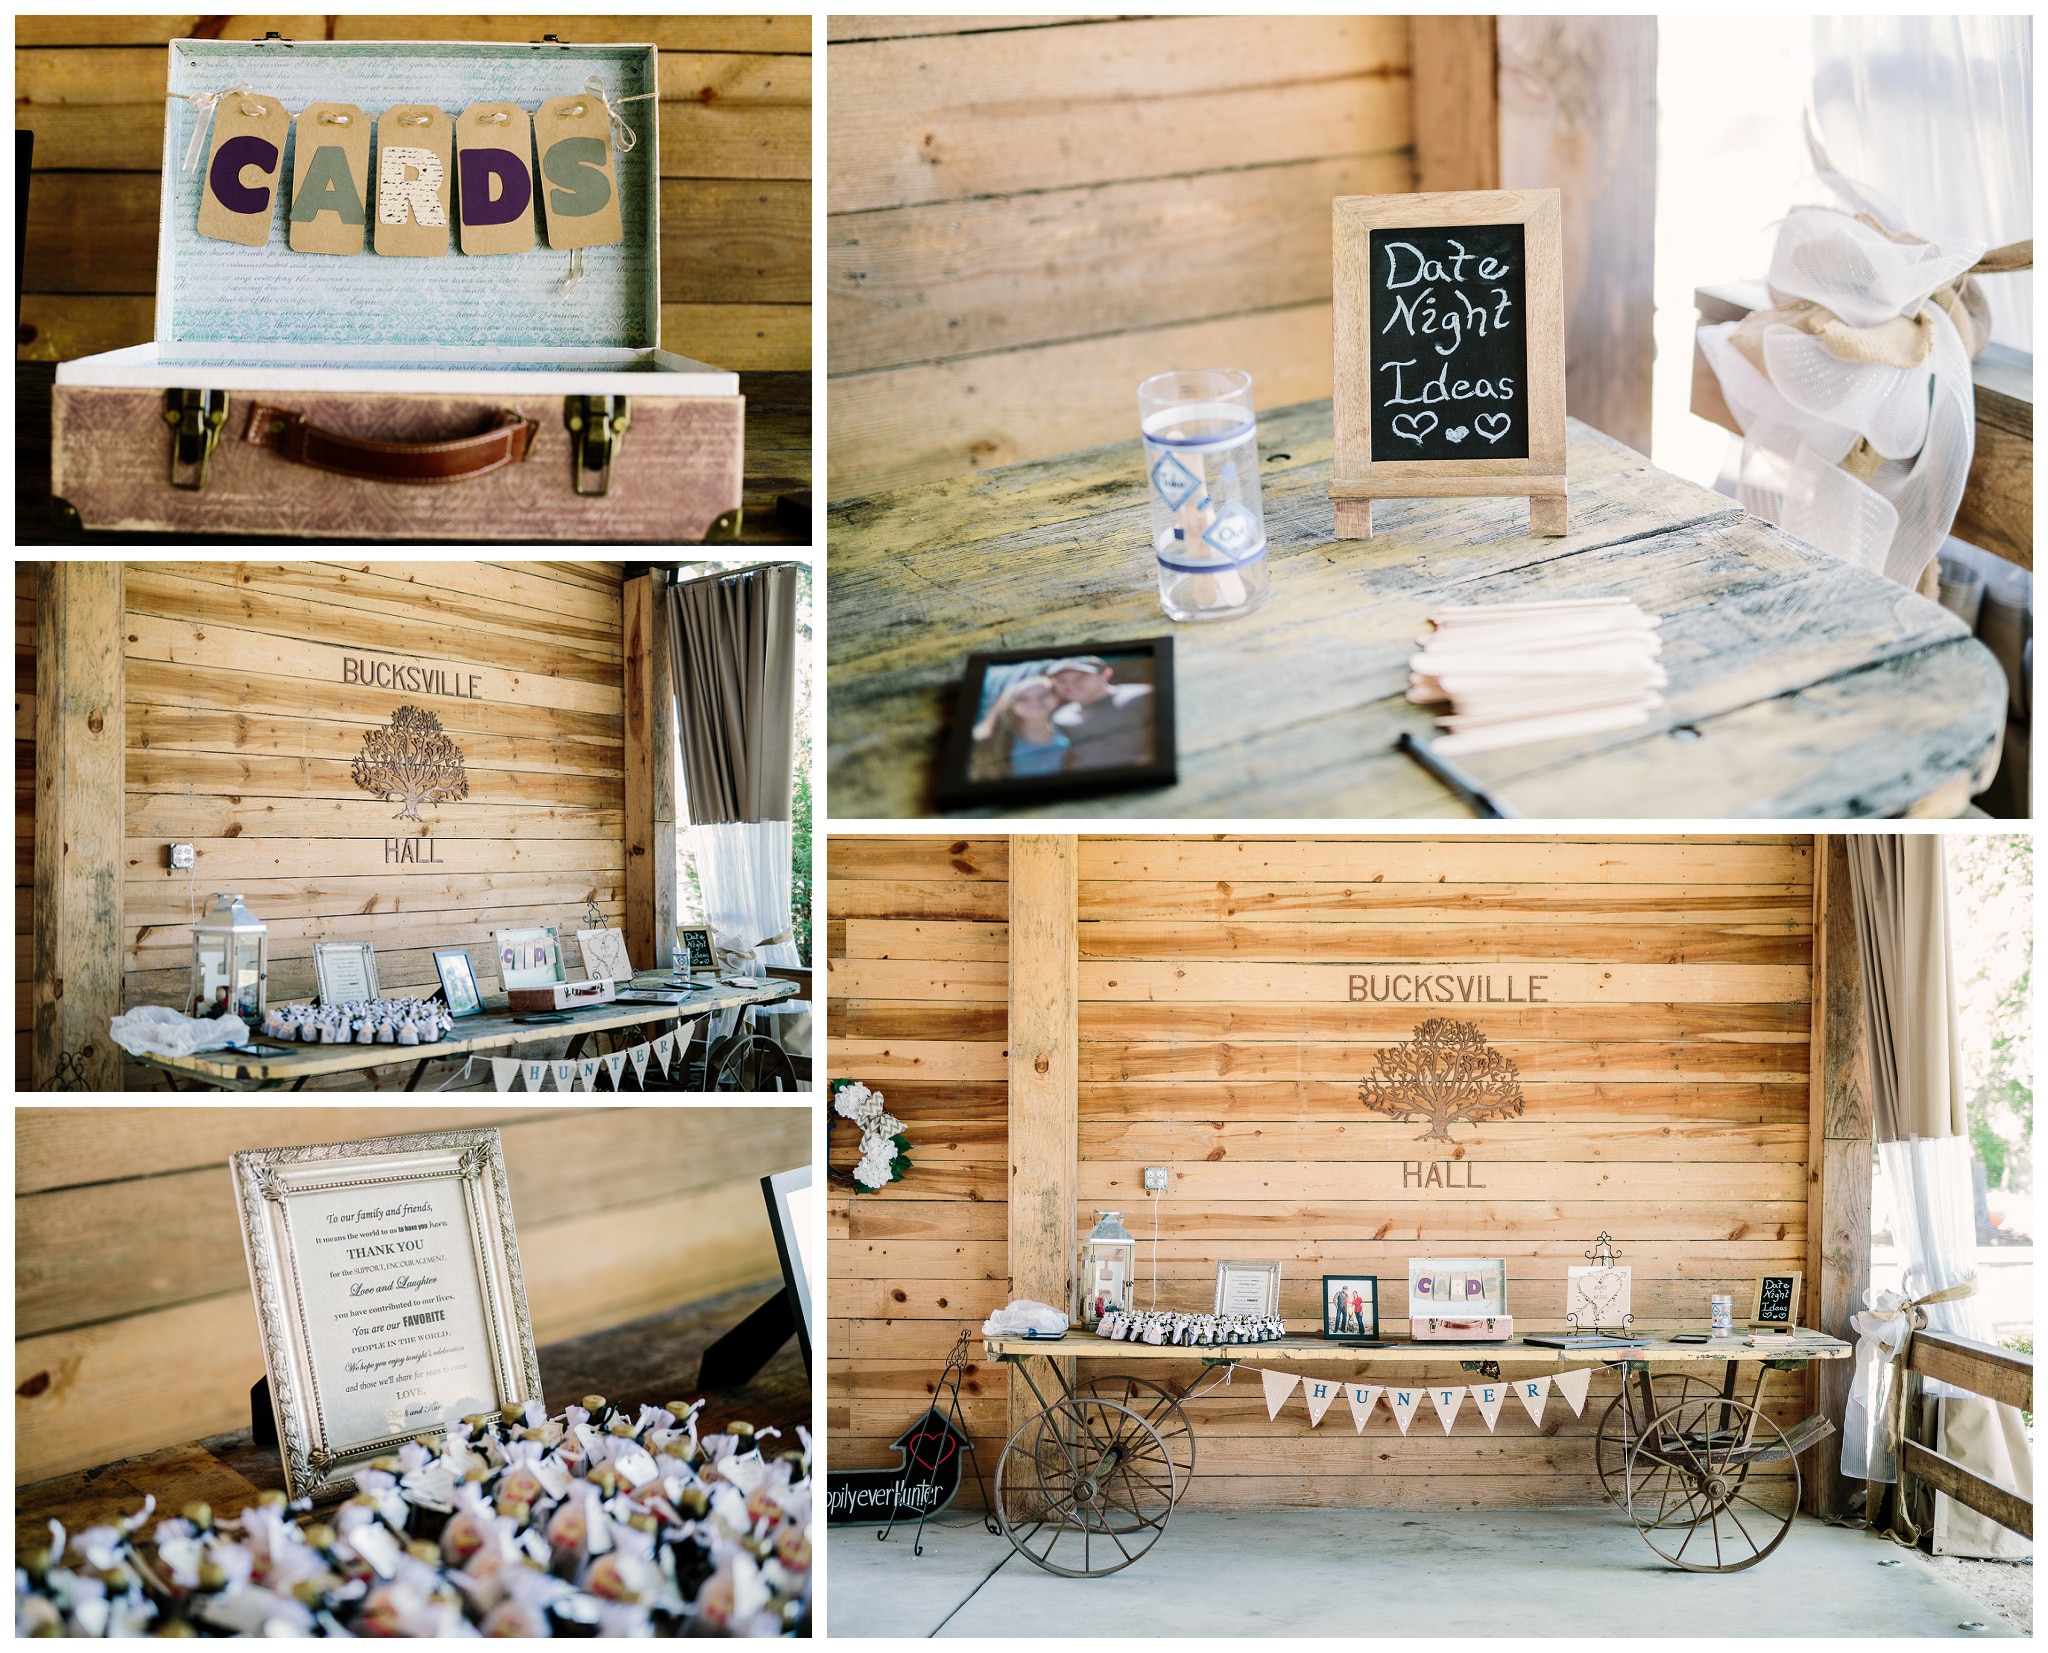 Lots of DIY details on a wedding day at the Bucksville hall